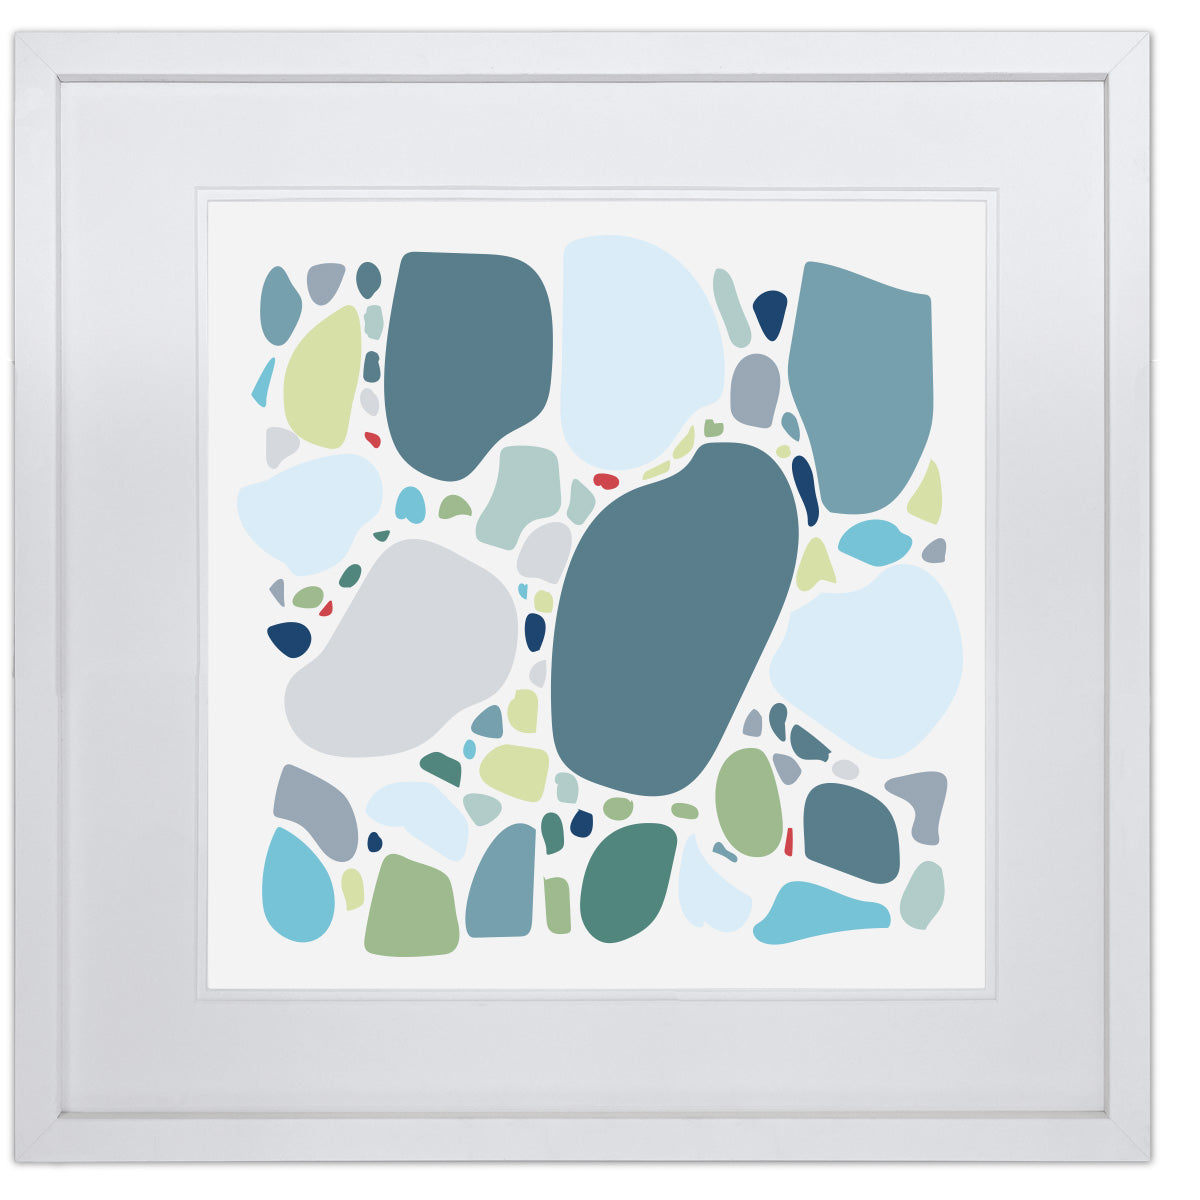 Maine Cottage Pebbles - Dark by Gene Barbera for Maine Cottage® 